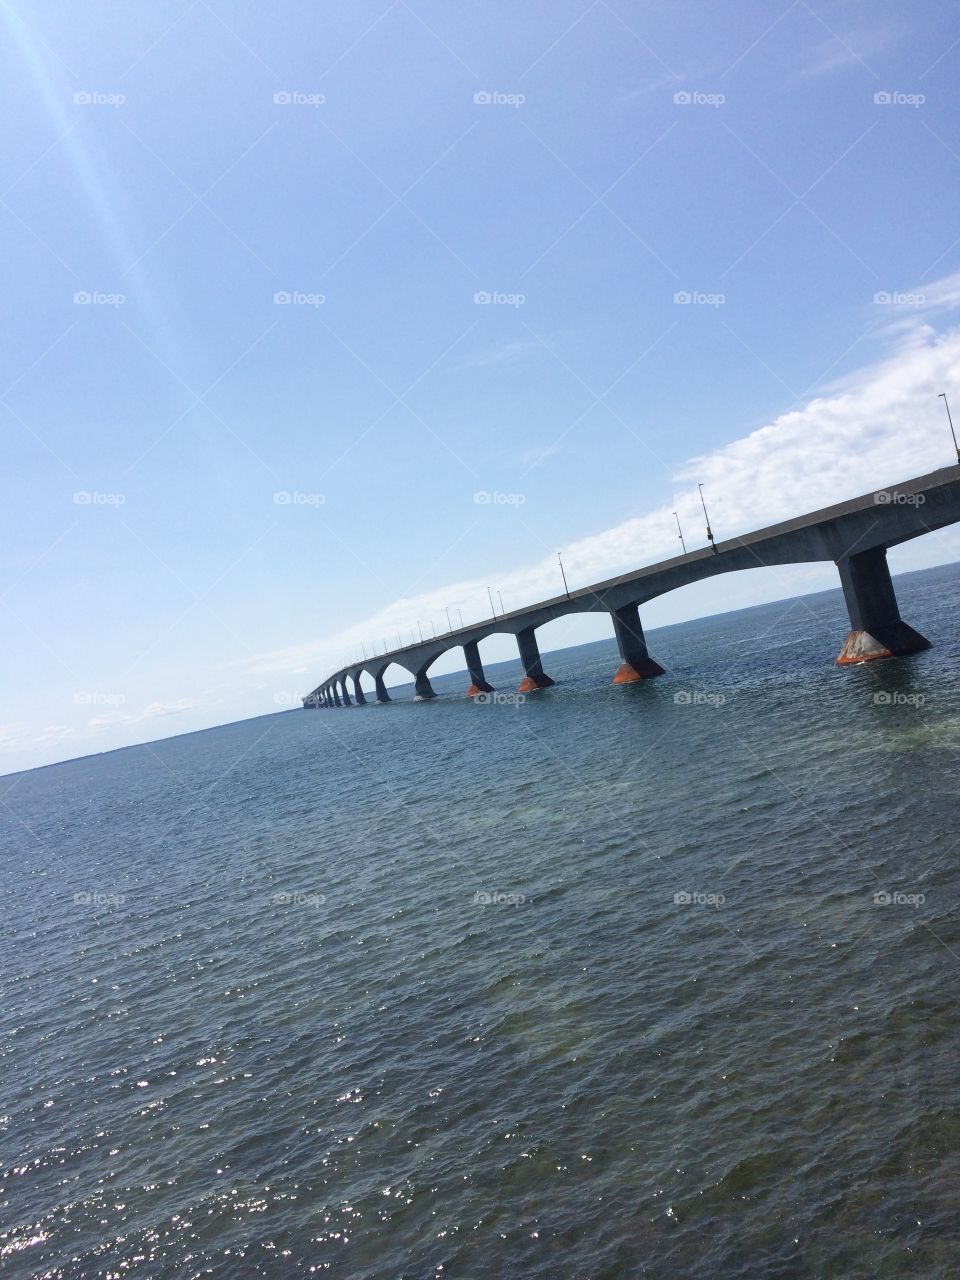 A beautiful photo of the Confederation Bridge taken off the shore of Prince Edward Island with a clear blue sky. 